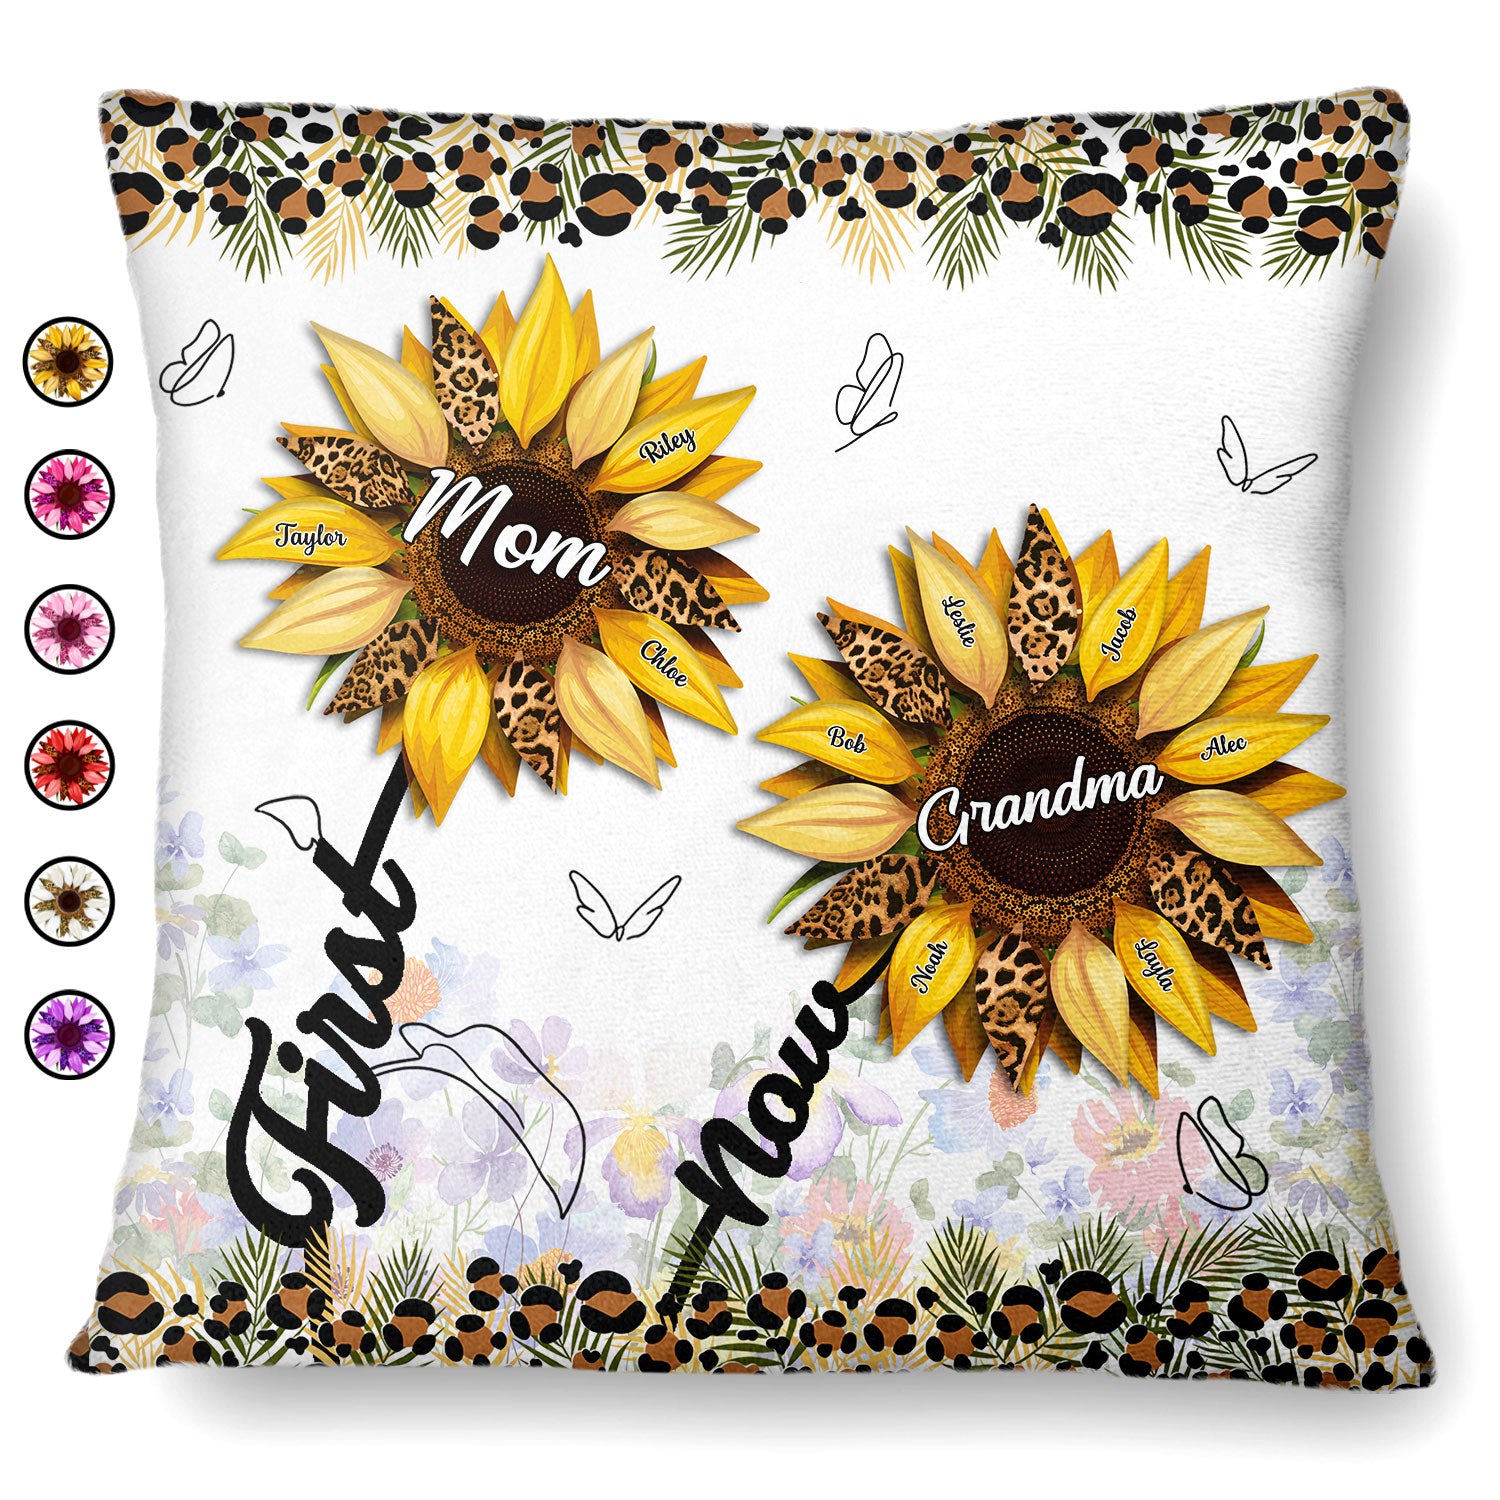 First Mom Now Grandma - Gift For Mothers, Grandmas, Aunties - Personalized Pillow